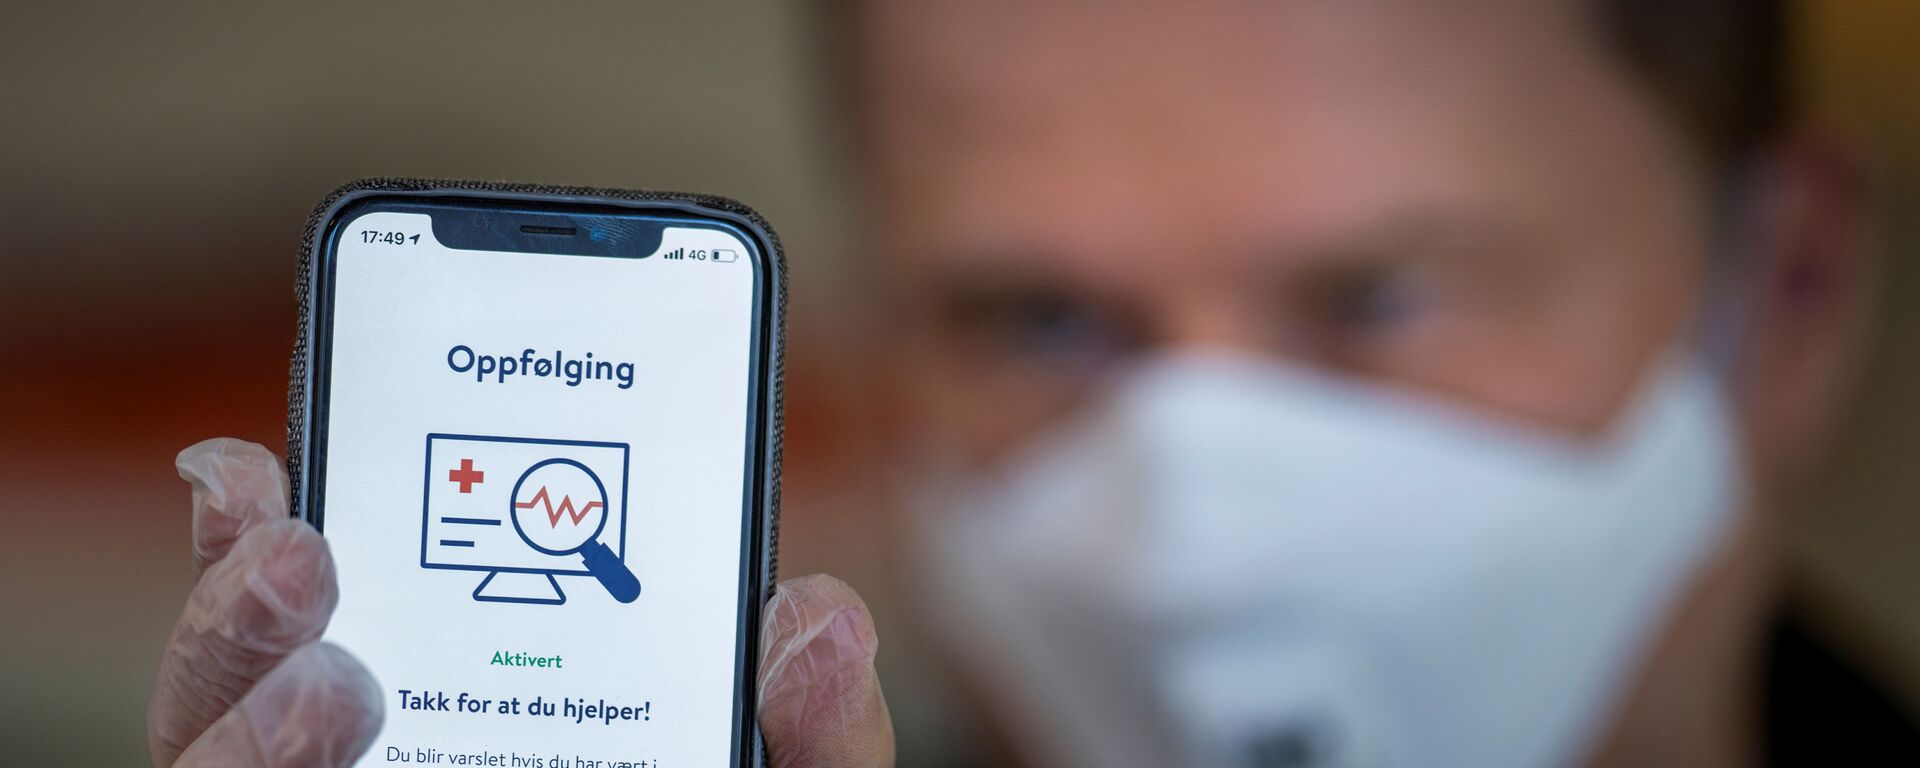 FILE PHOTO: The National Institute of Public Health's new app Smittestopp (Infection Stop) for infection tracking is pictured, in Oslo, Norway April 16, 2020. Picture taken April 16, 2020 - Sputnik International, 1920